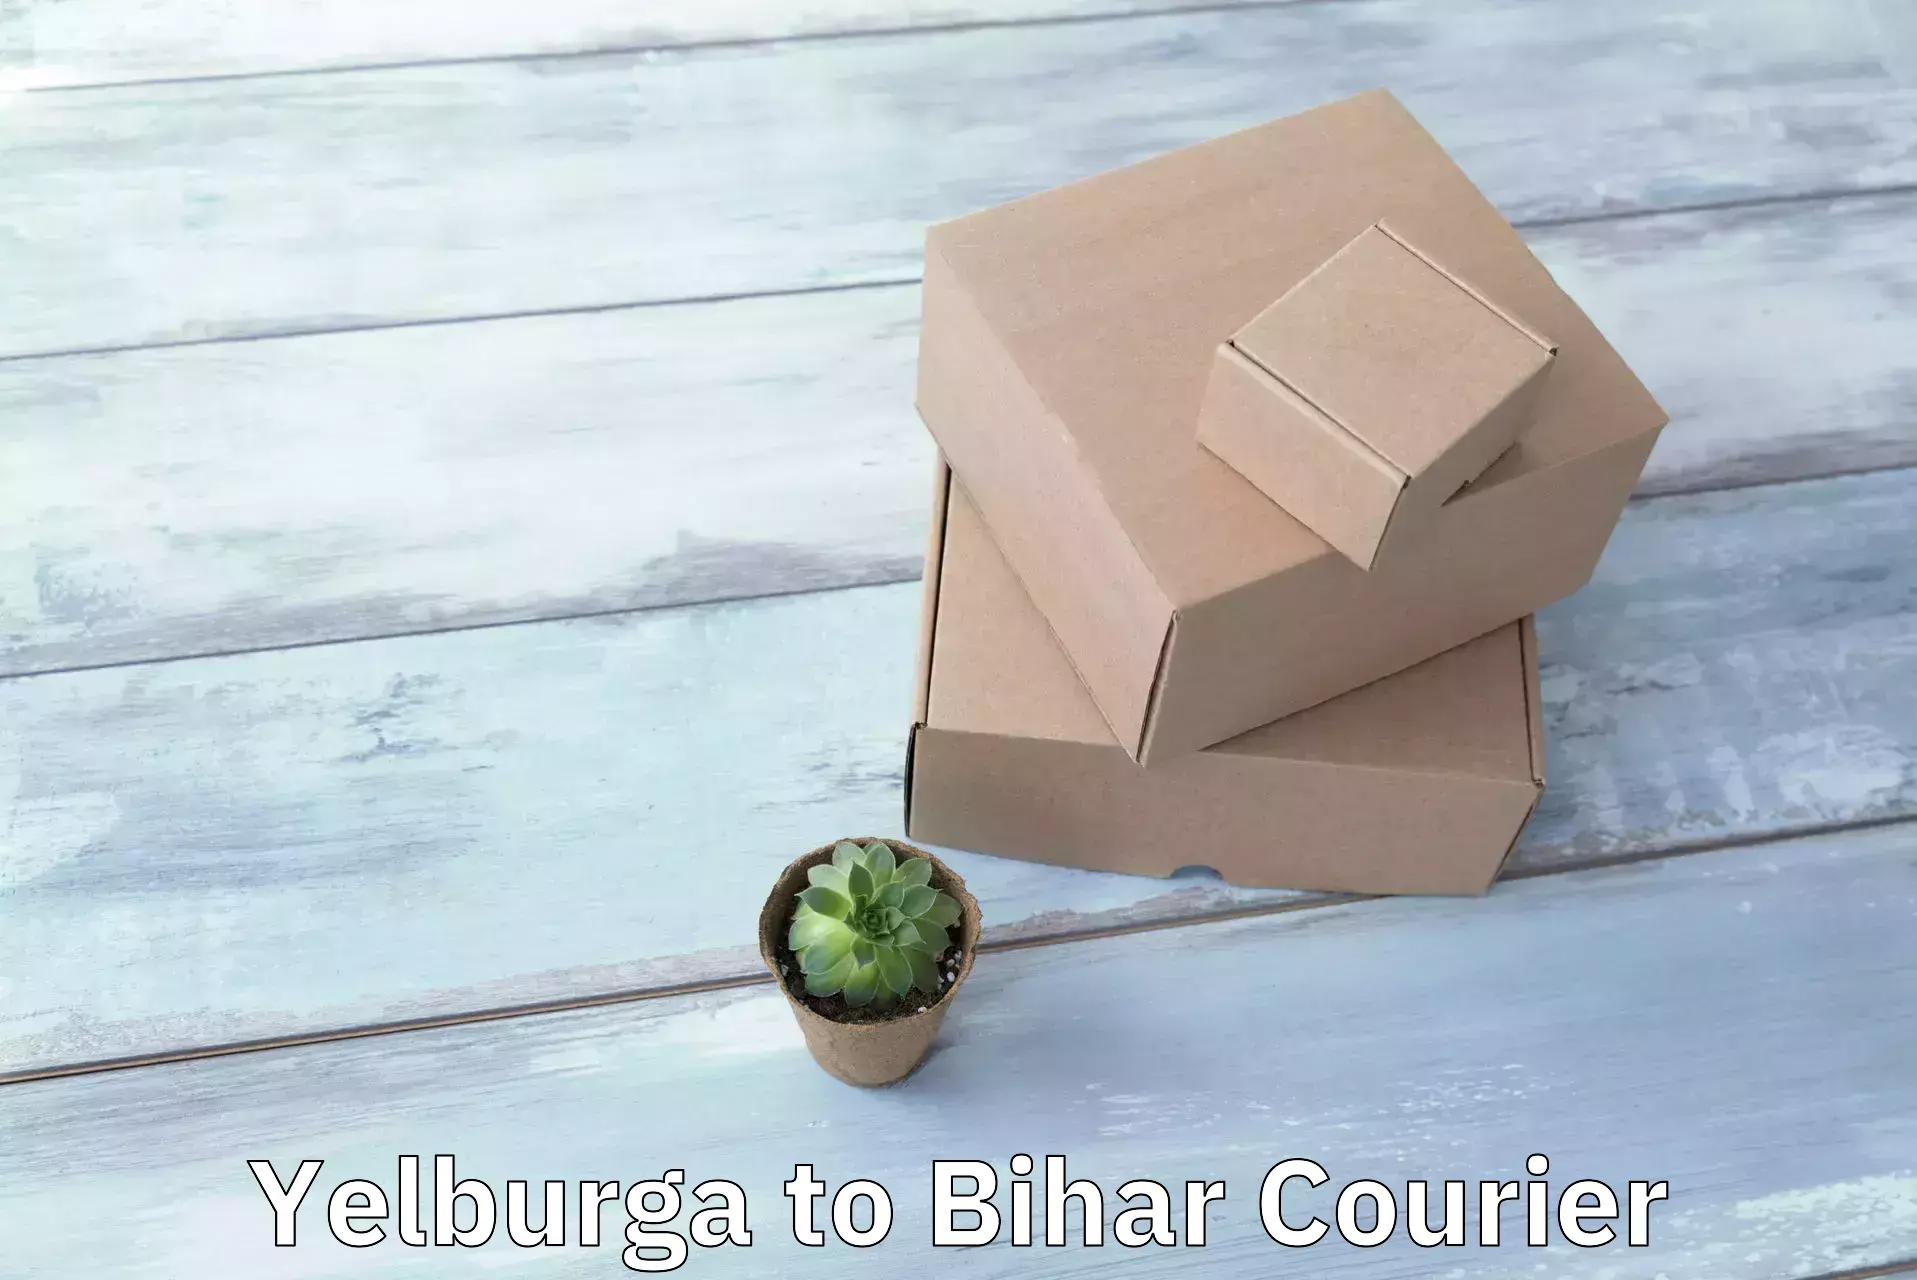 Expedited parcel delivery in Yelburga to Biraul